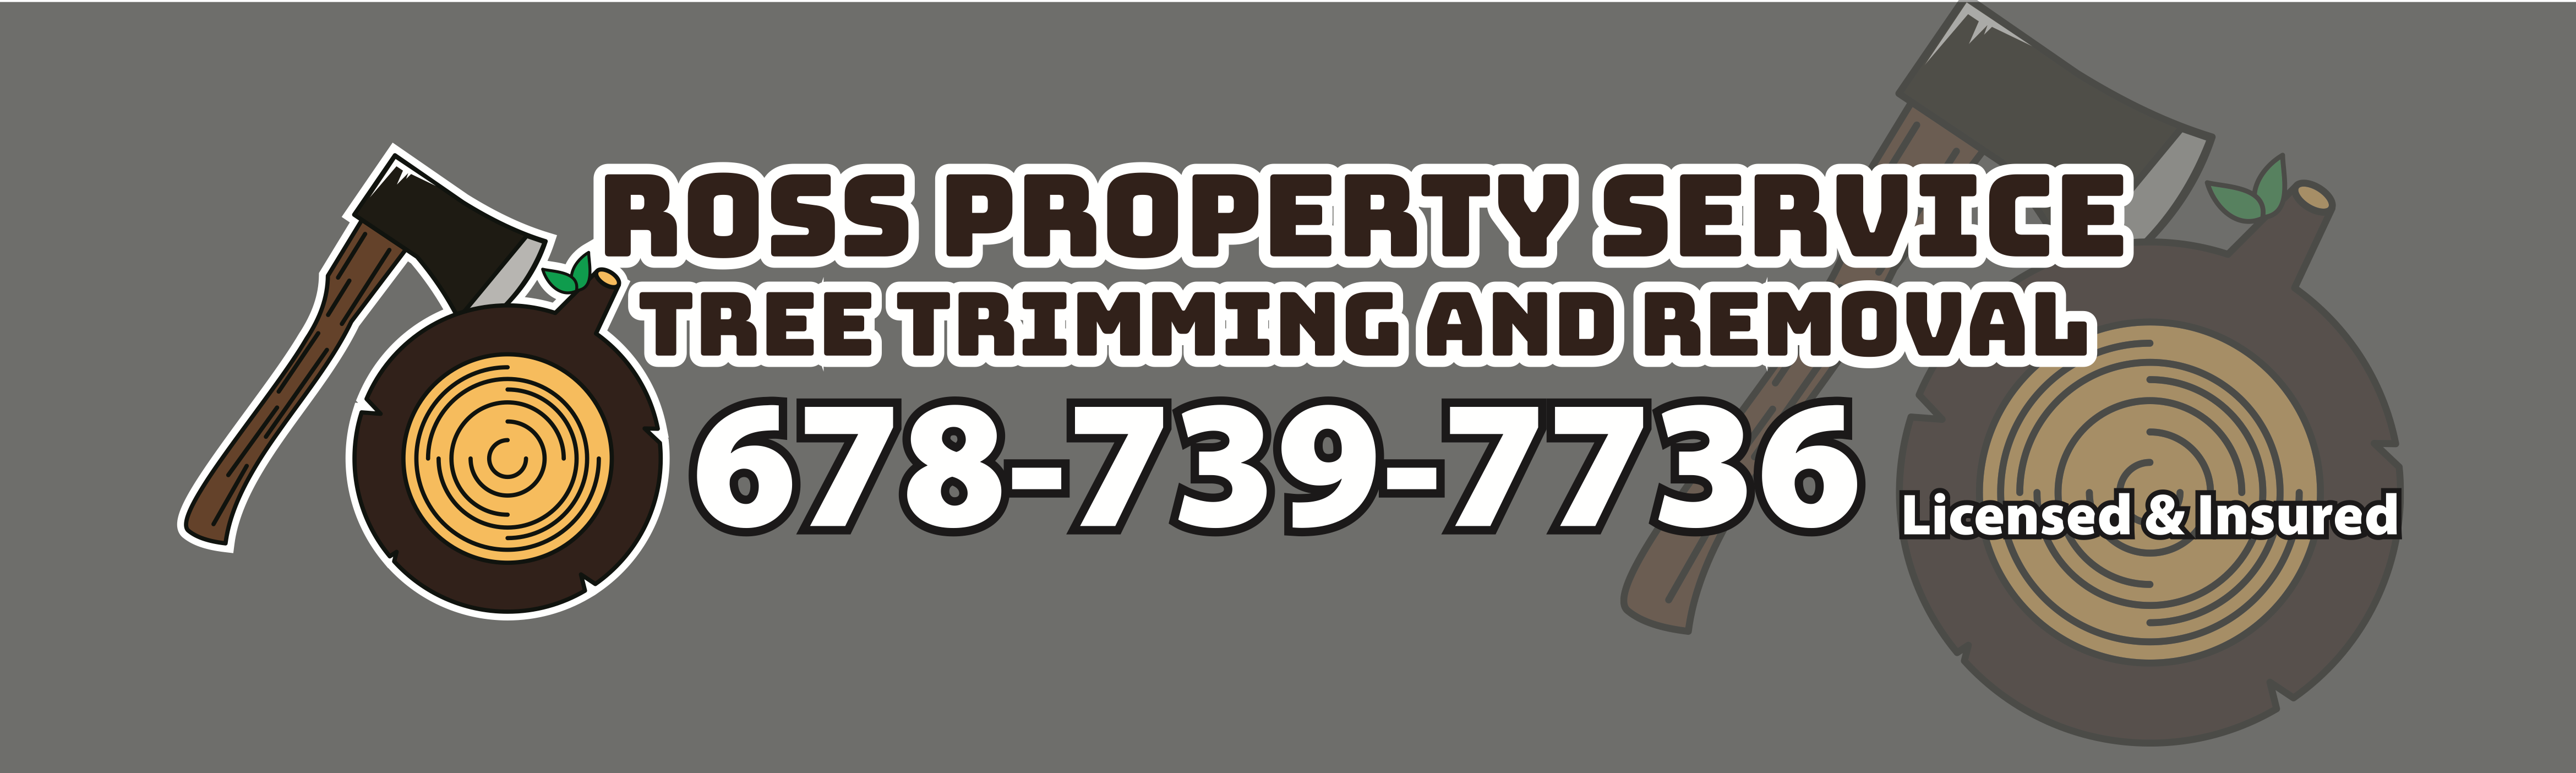  for Ross Property Service in Fayette County, GA